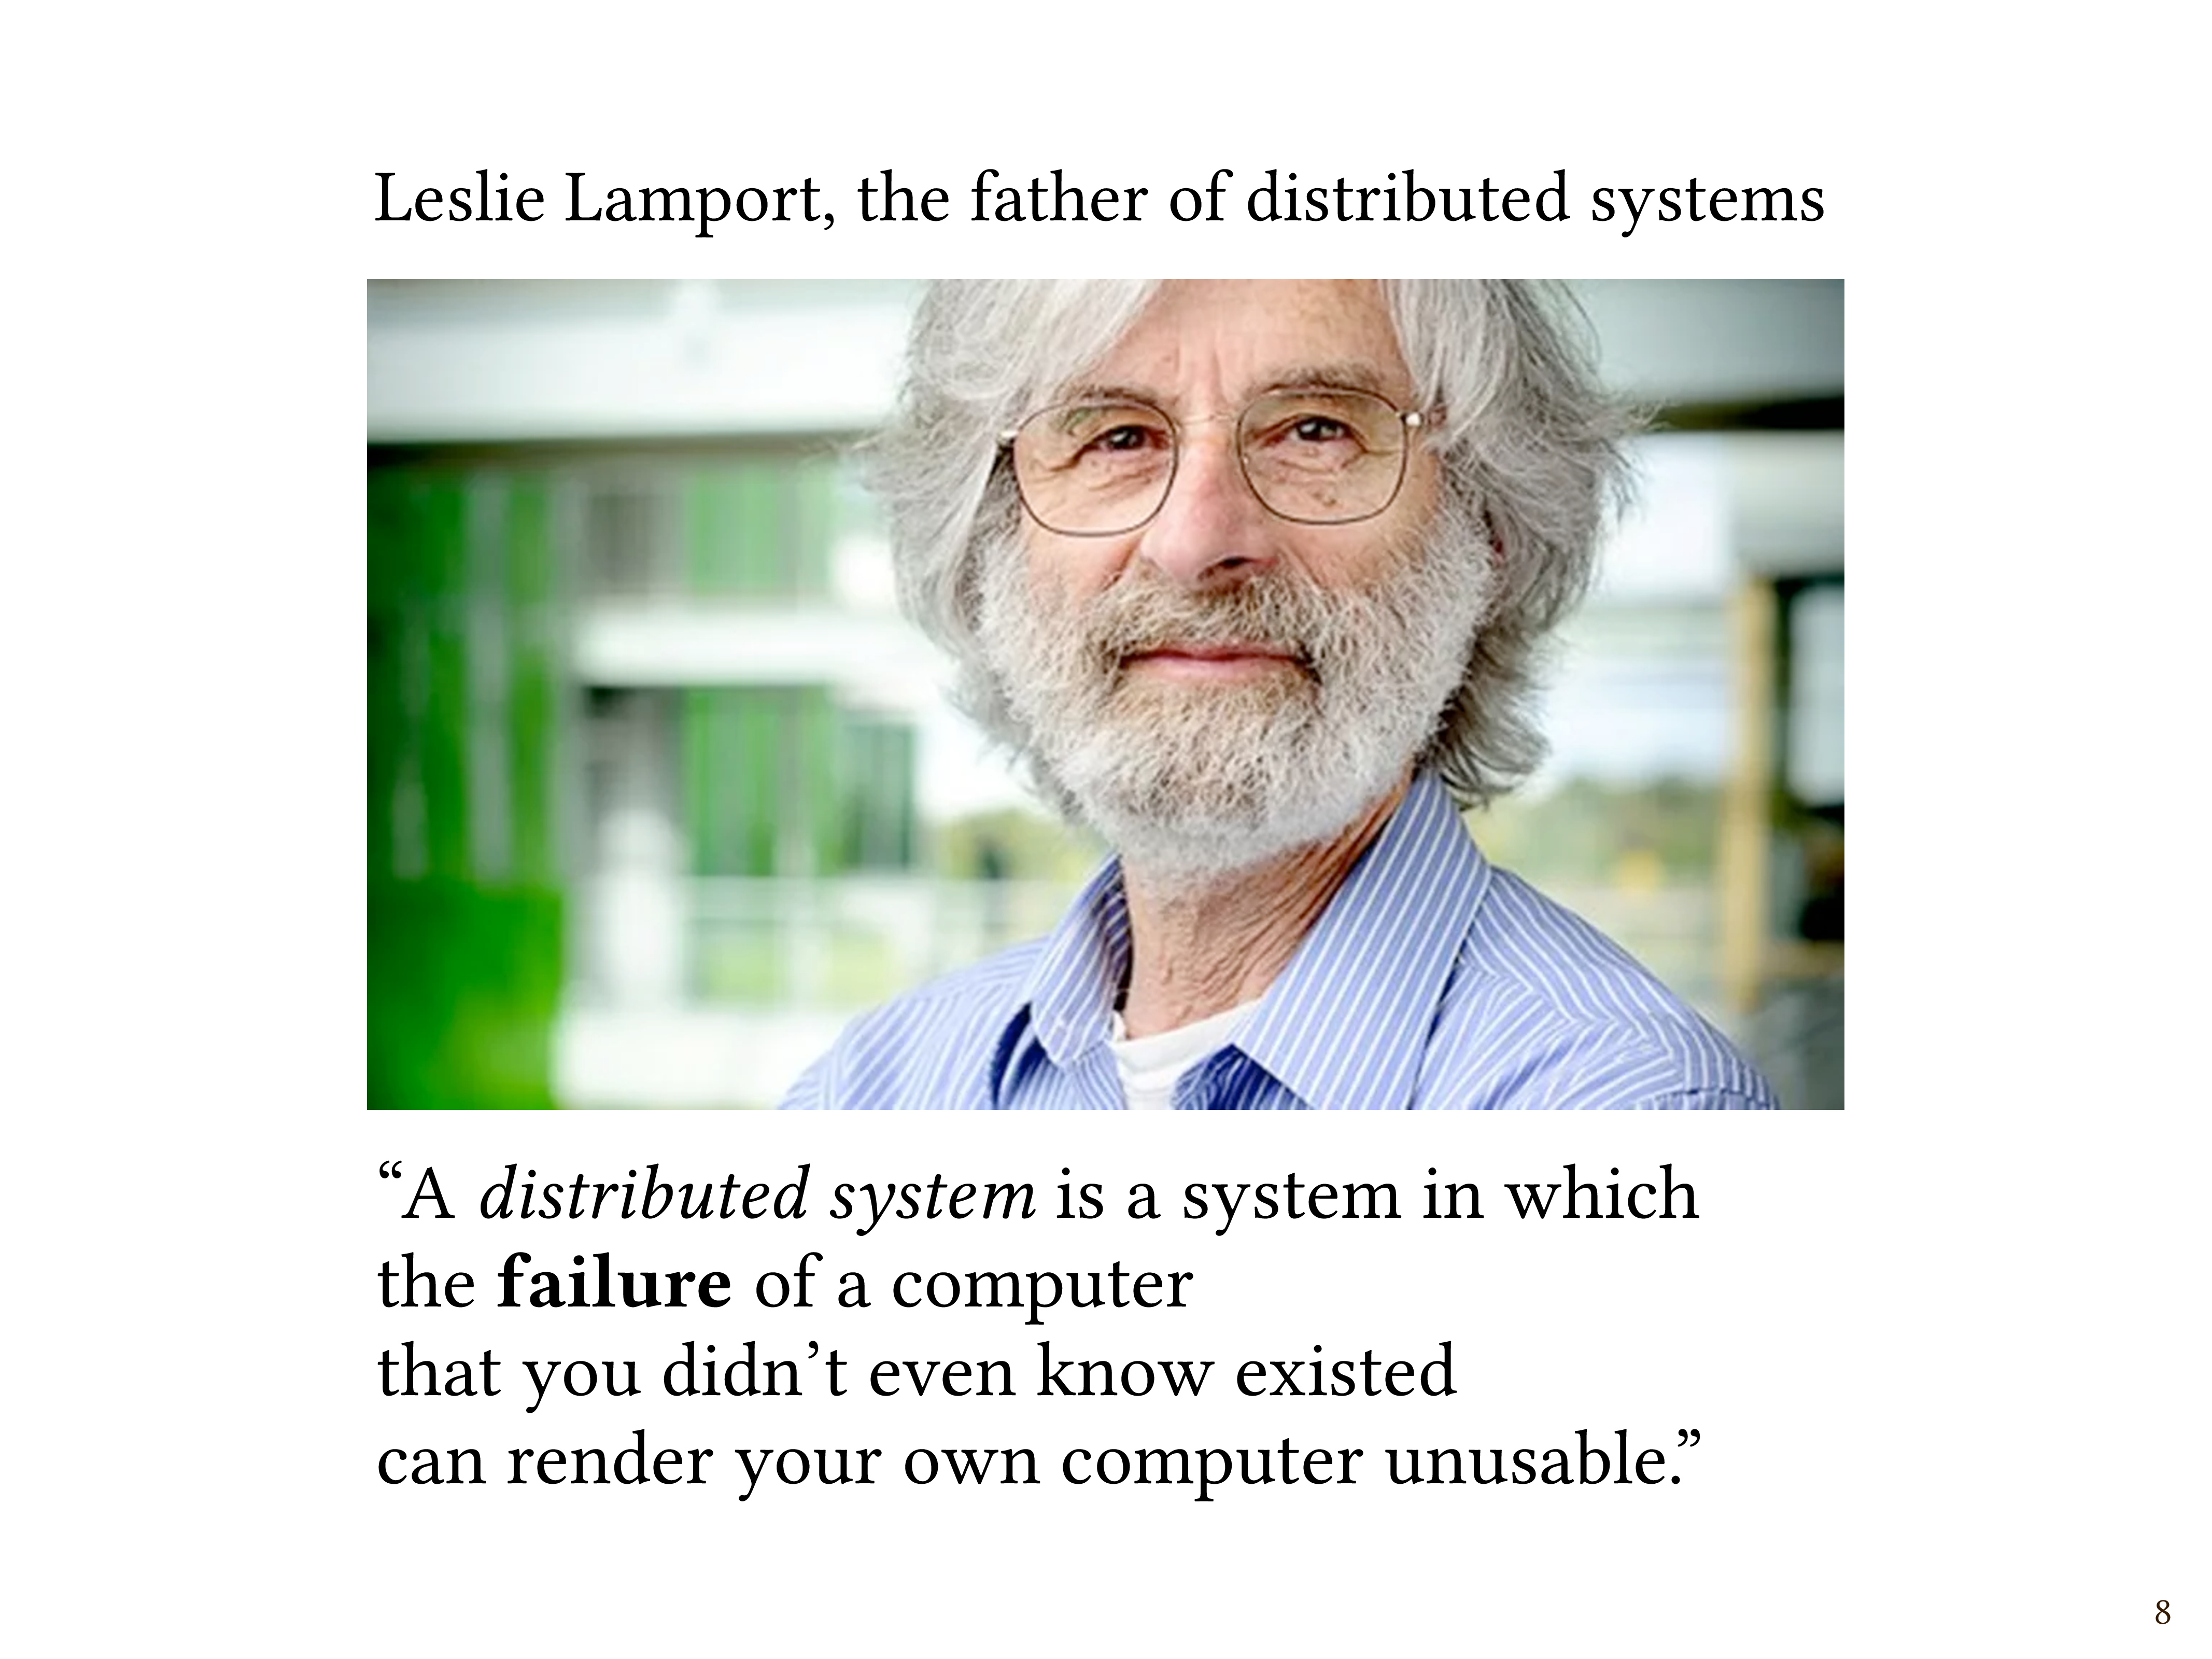 A photo of Leslie Lamport, with his famous quotation: 'A distributed system is one in which the failure of a computer that you didn't even know existed can render your own computer unusable.'